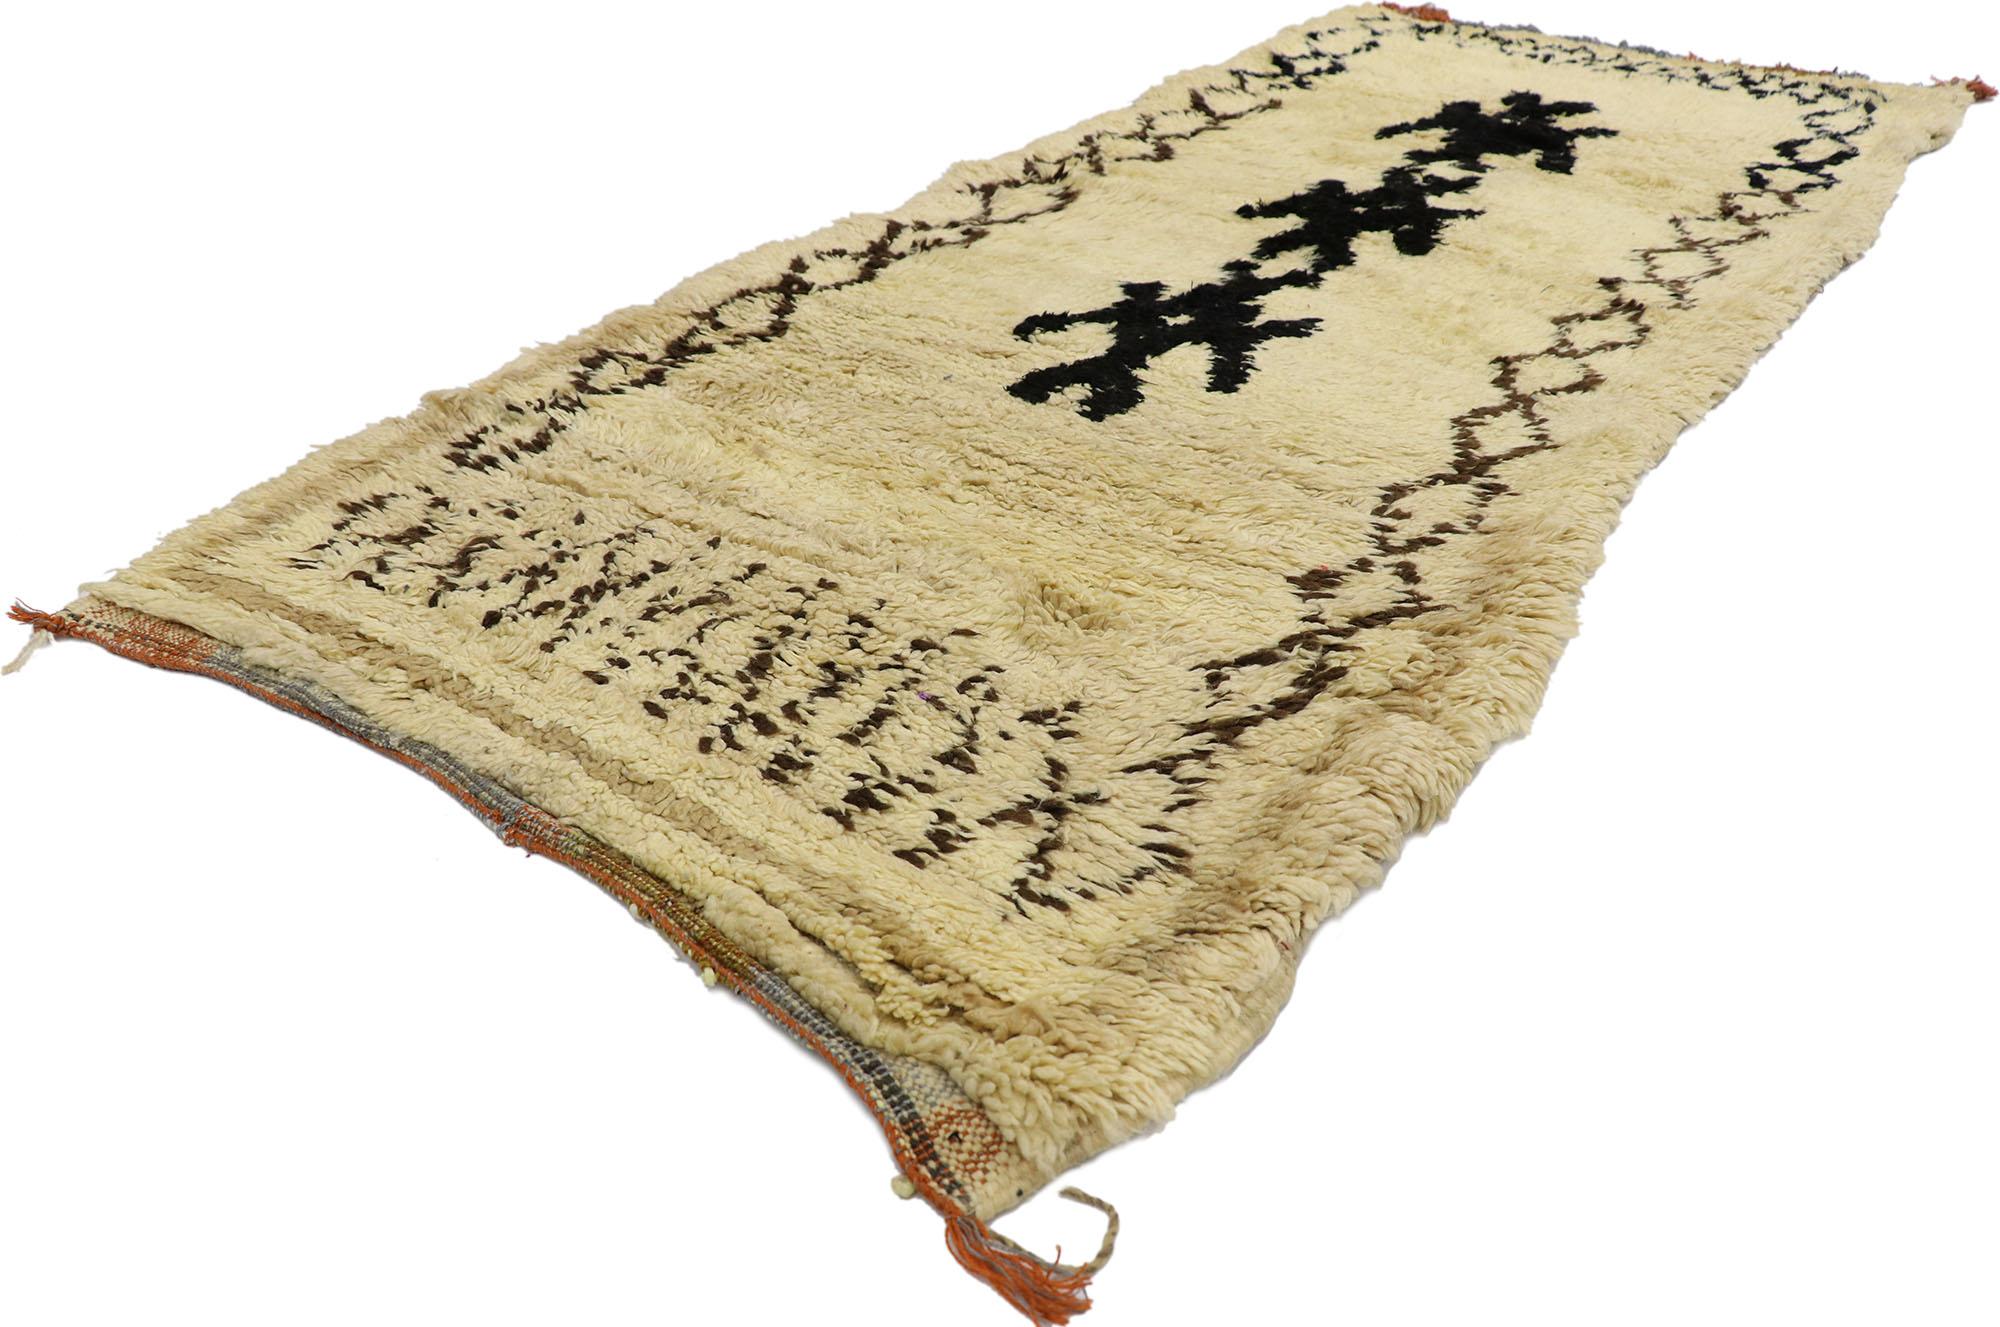 21574 Vintage Berber Moroccan Azilal rug with Tribal Style 02'11 x 06'10. With its simplicity, plush pile and tribal style, this hand knotted wool vintage Berber Moroccan Azilal rug is a captivating vision of woven beauty. The abrashed beige field